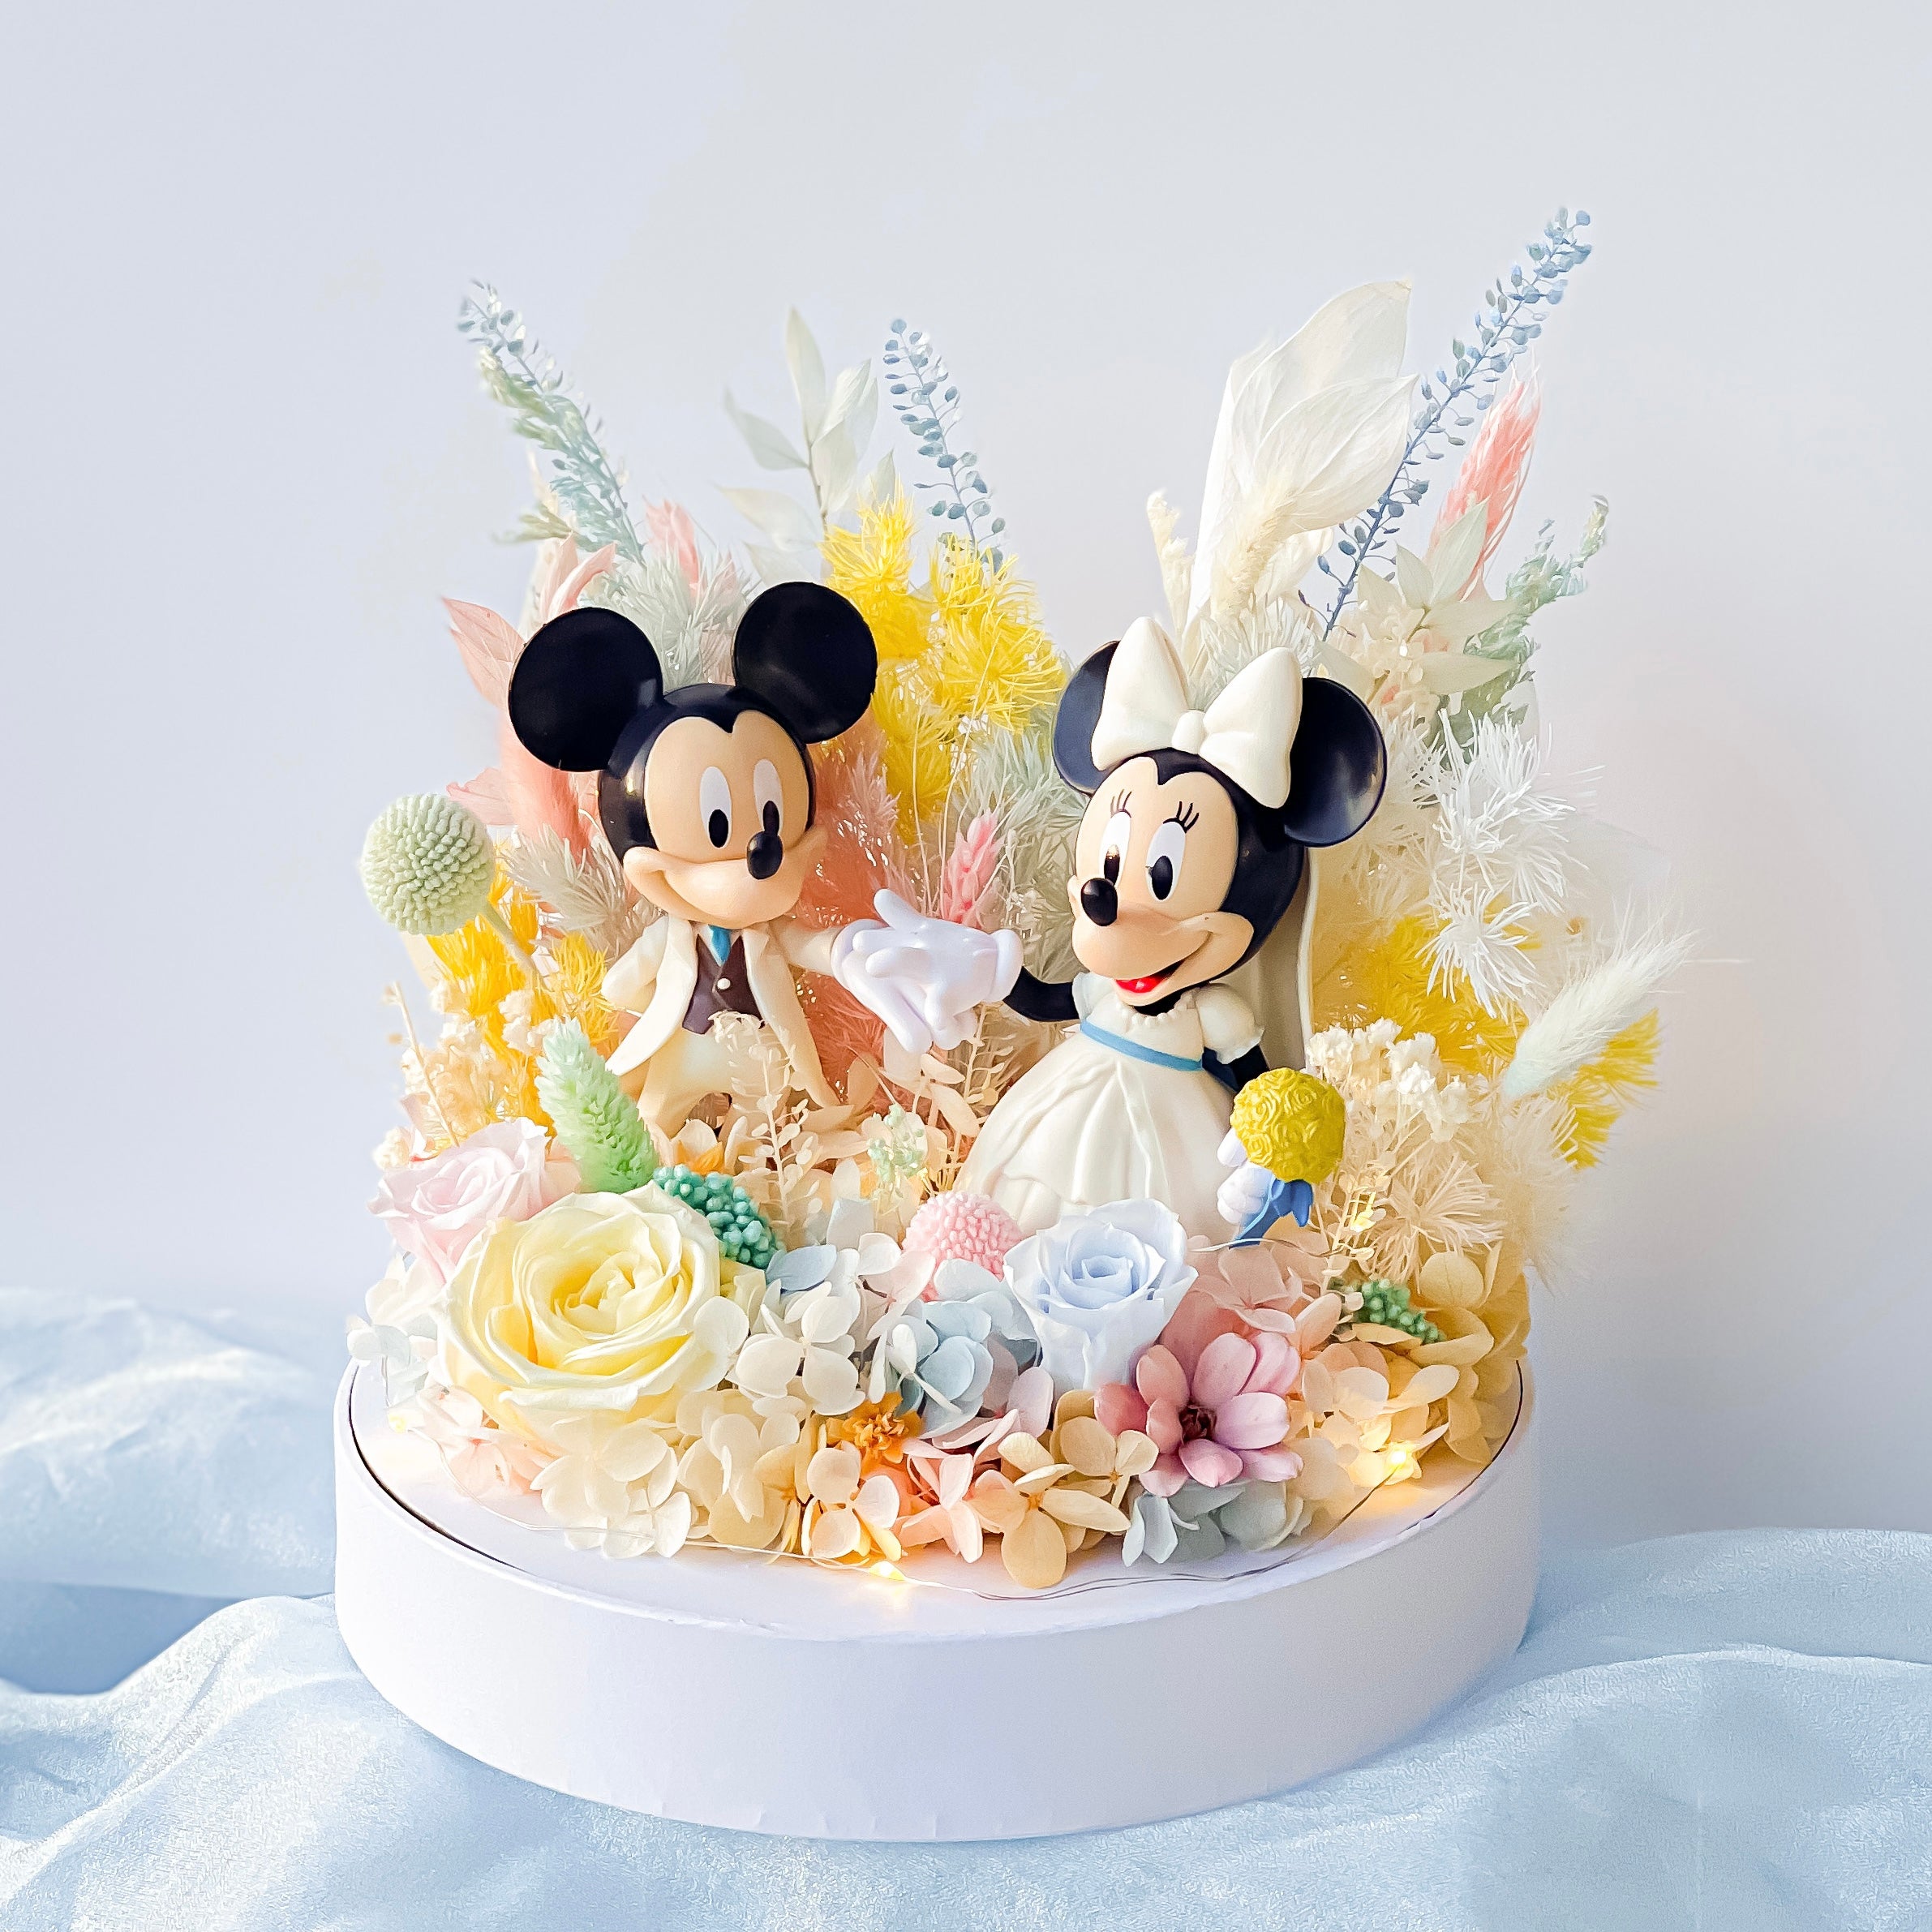 Fantasia Bloom Box - Mickey & Minnie with preserved flowers. Wedding / Anniversary Gift